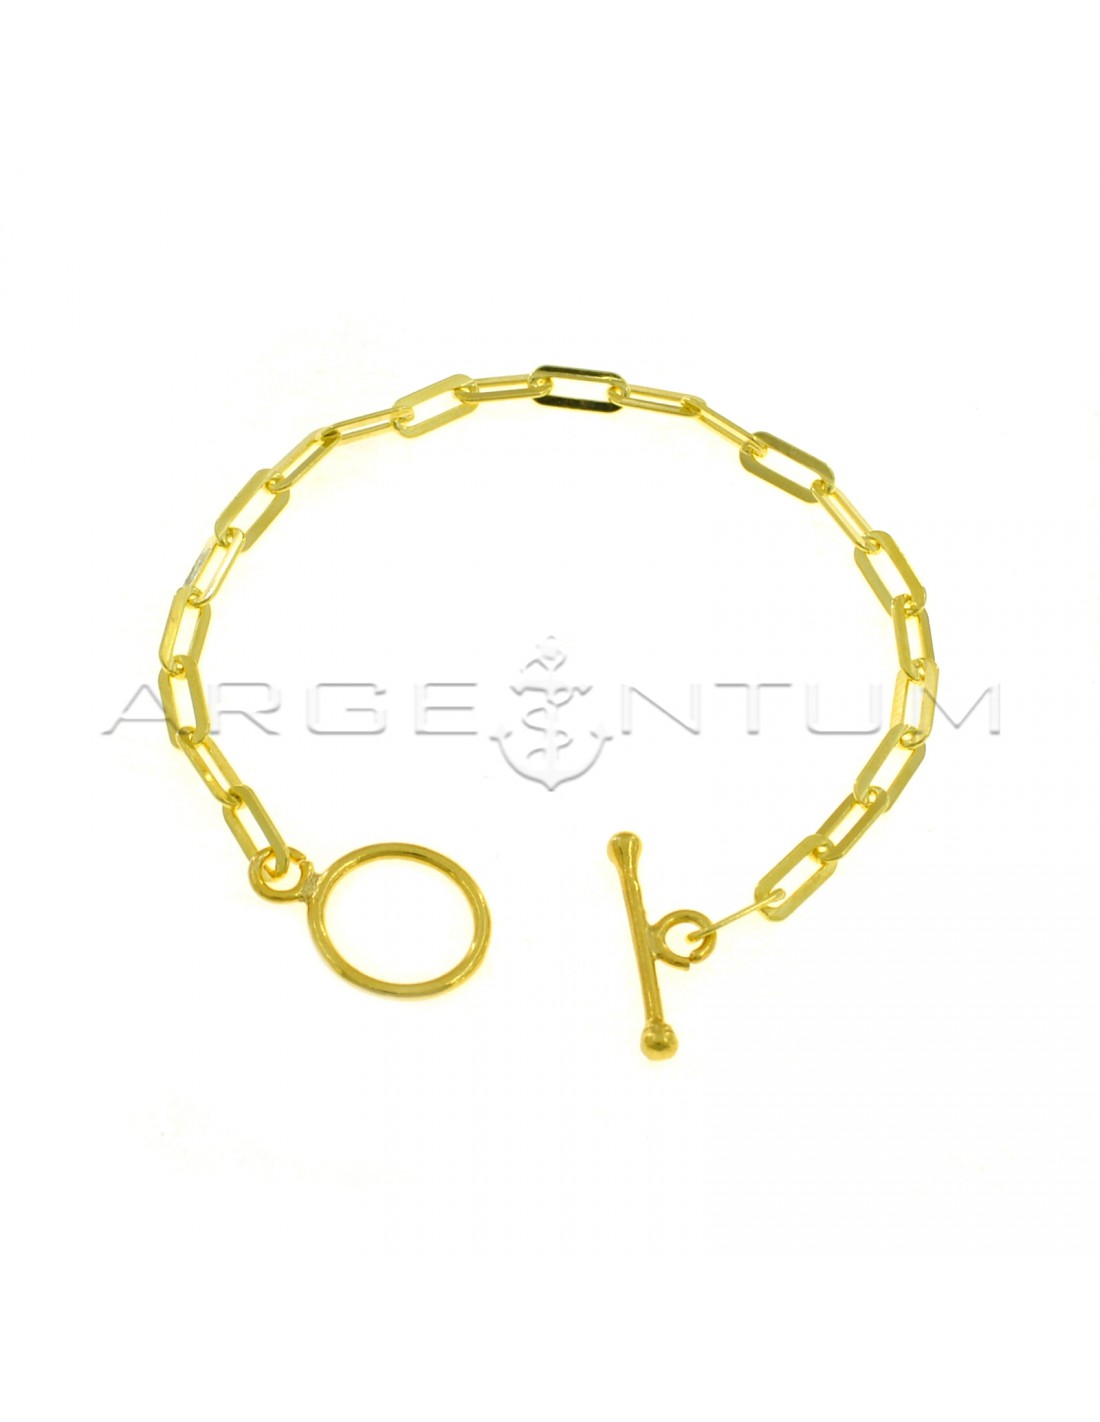 https://www.argentumgioielli.it/38088-thickbox_default/biscuit-mesh-bracelet-with-yellow-gold-plated-t-bar-clasp-in-925-silver.jpg